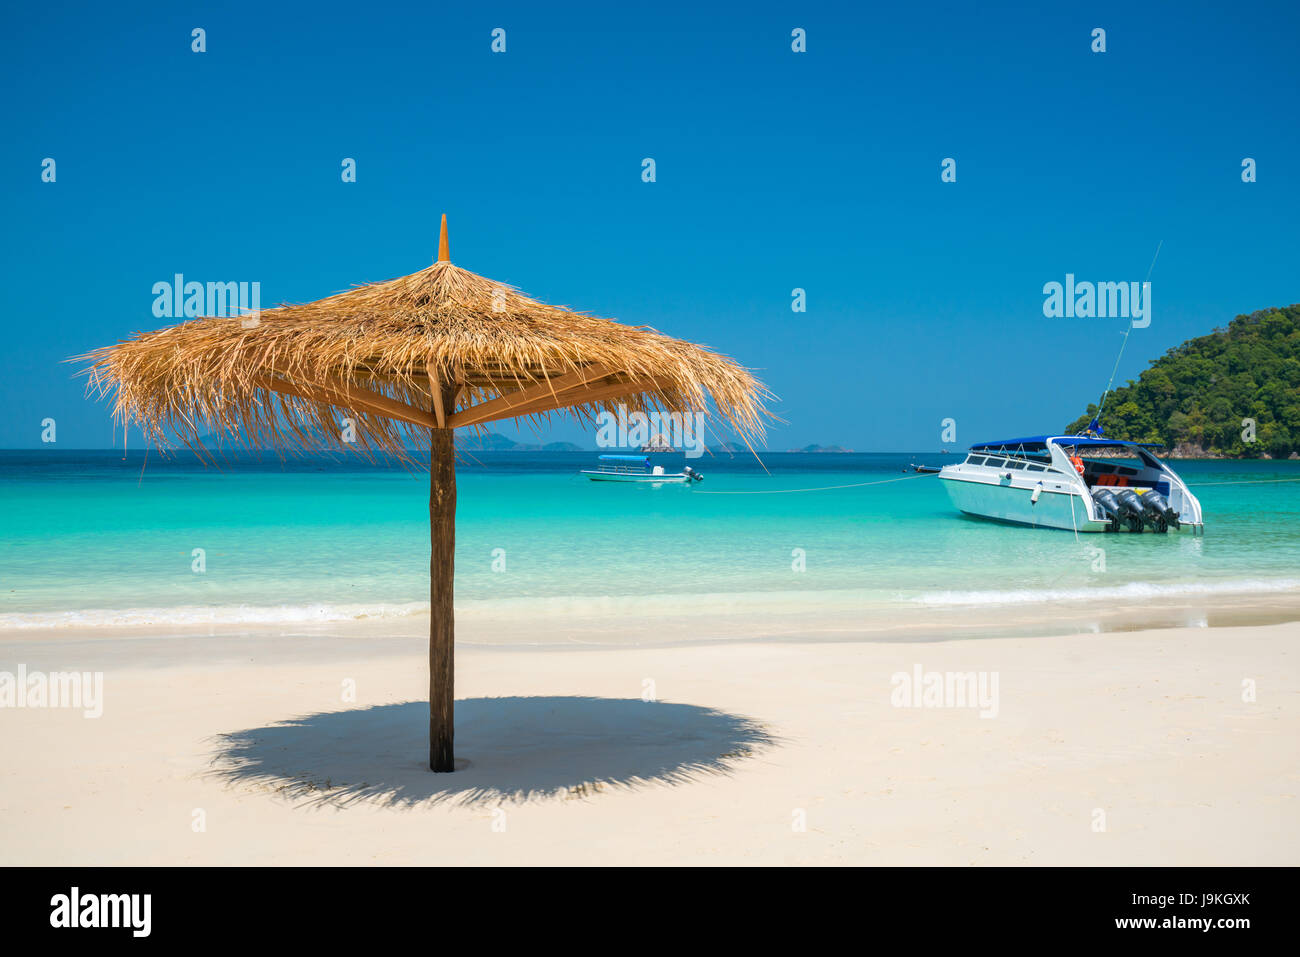 Beach Umbrella made of leafs on white beach in front of Sea day time blue sky wide shot background, Nyaung Oo Phee, Myanmar Stock Photo